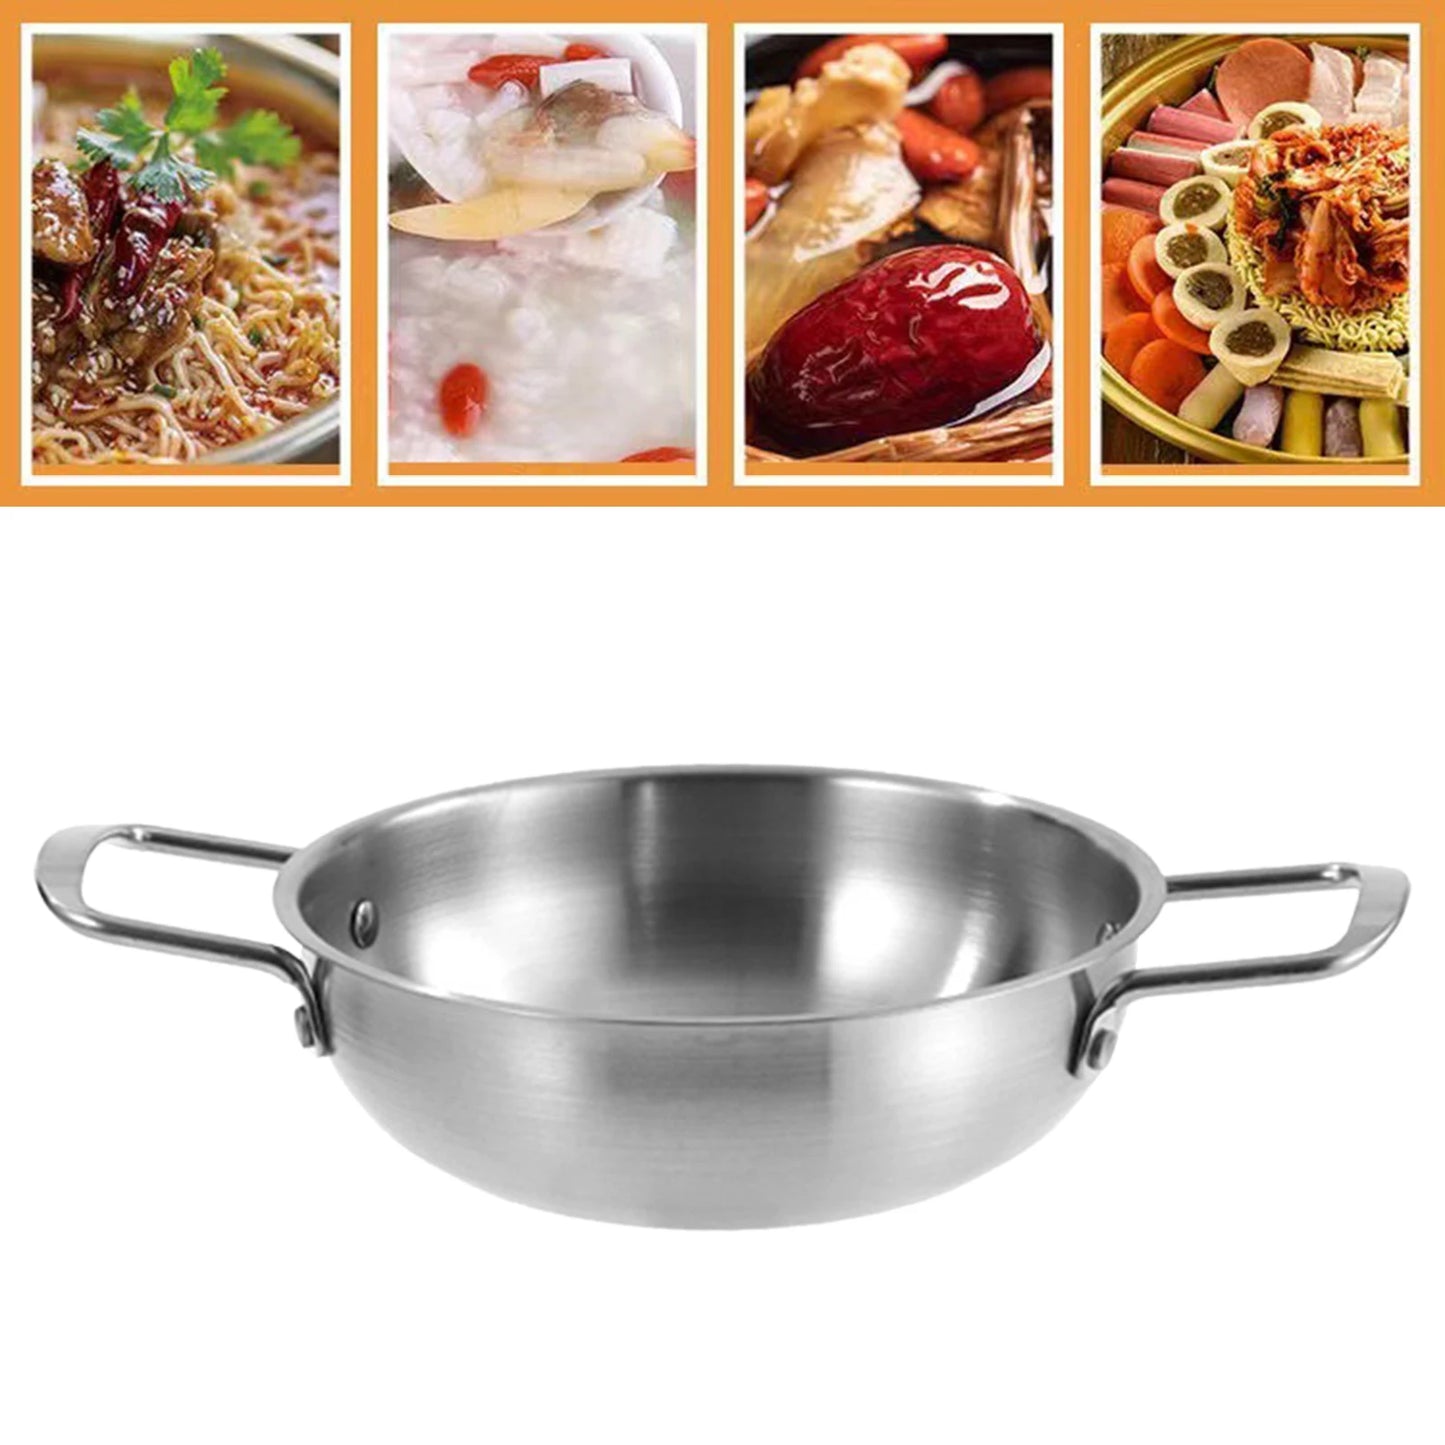 Double-Ear Stainless Steel Seafood Pot